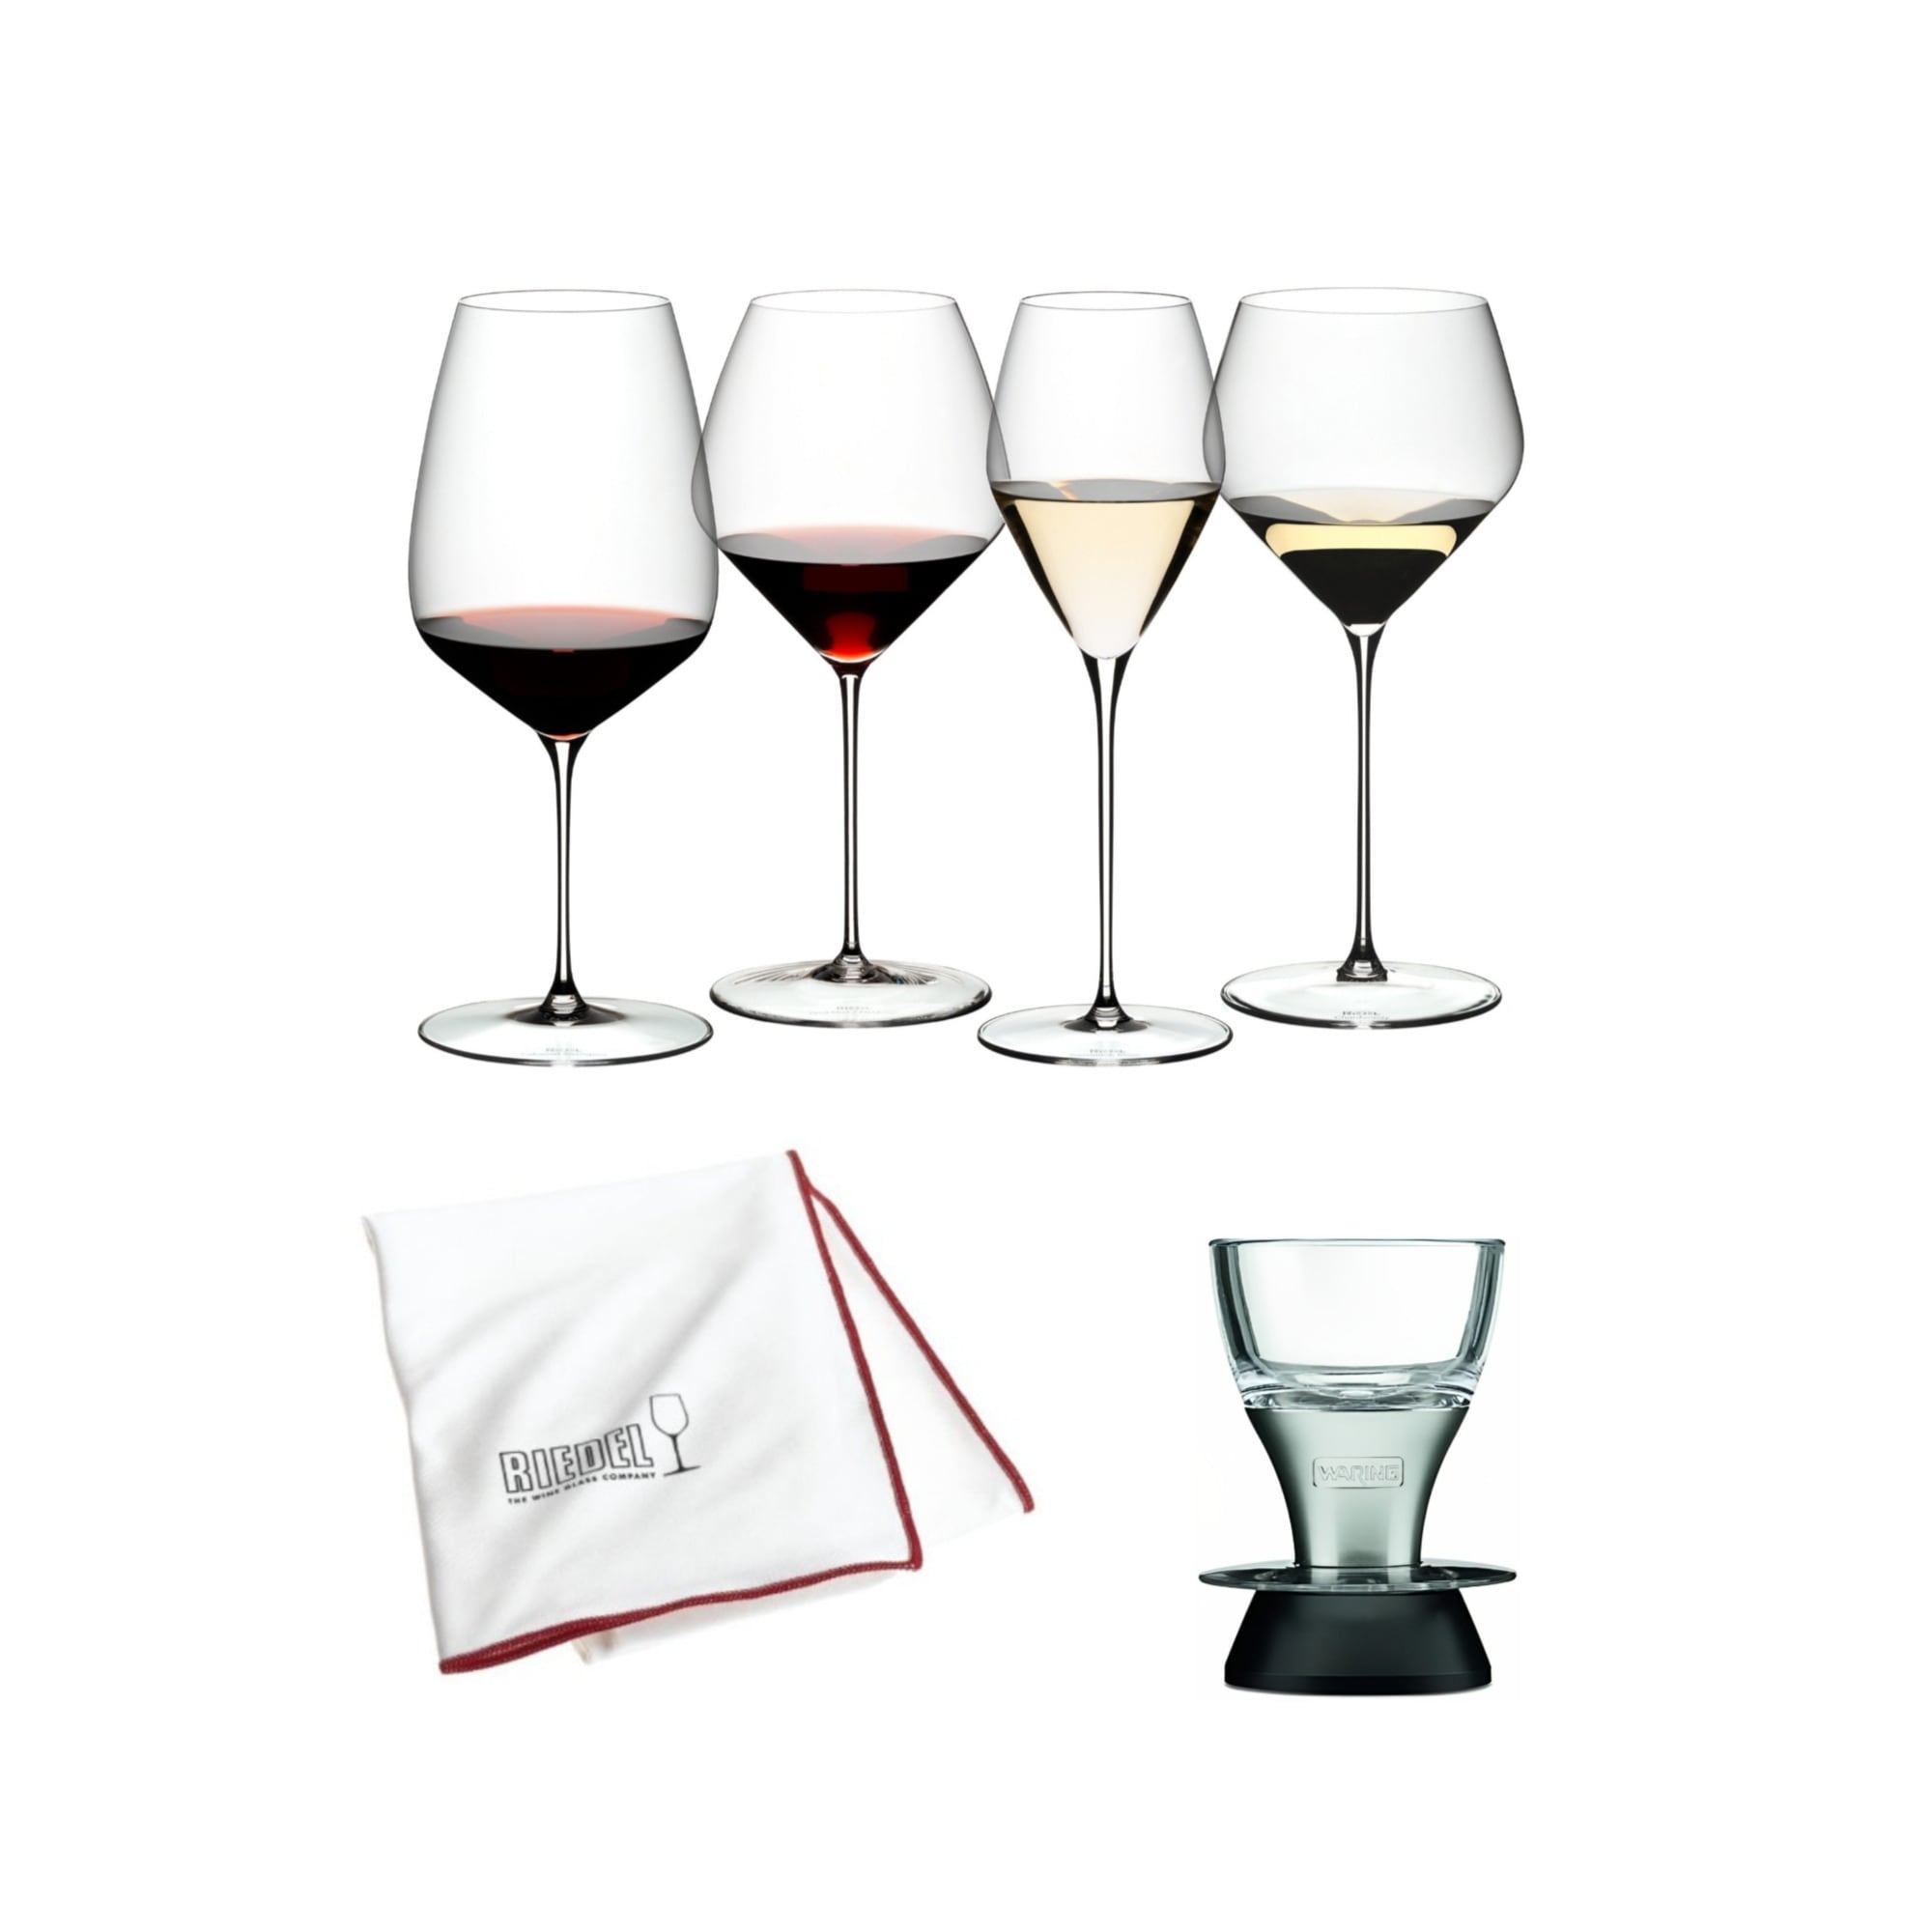 https://ak1.ostkcdn.com/images/products/is/images/direct/8407ebee8775657383315a5bff1e64735468a567/Riedel-Winewings-Tasting-Wine-Glass-Set-%284-Pack%29-w-Aerator-%26-Cloth.jpg